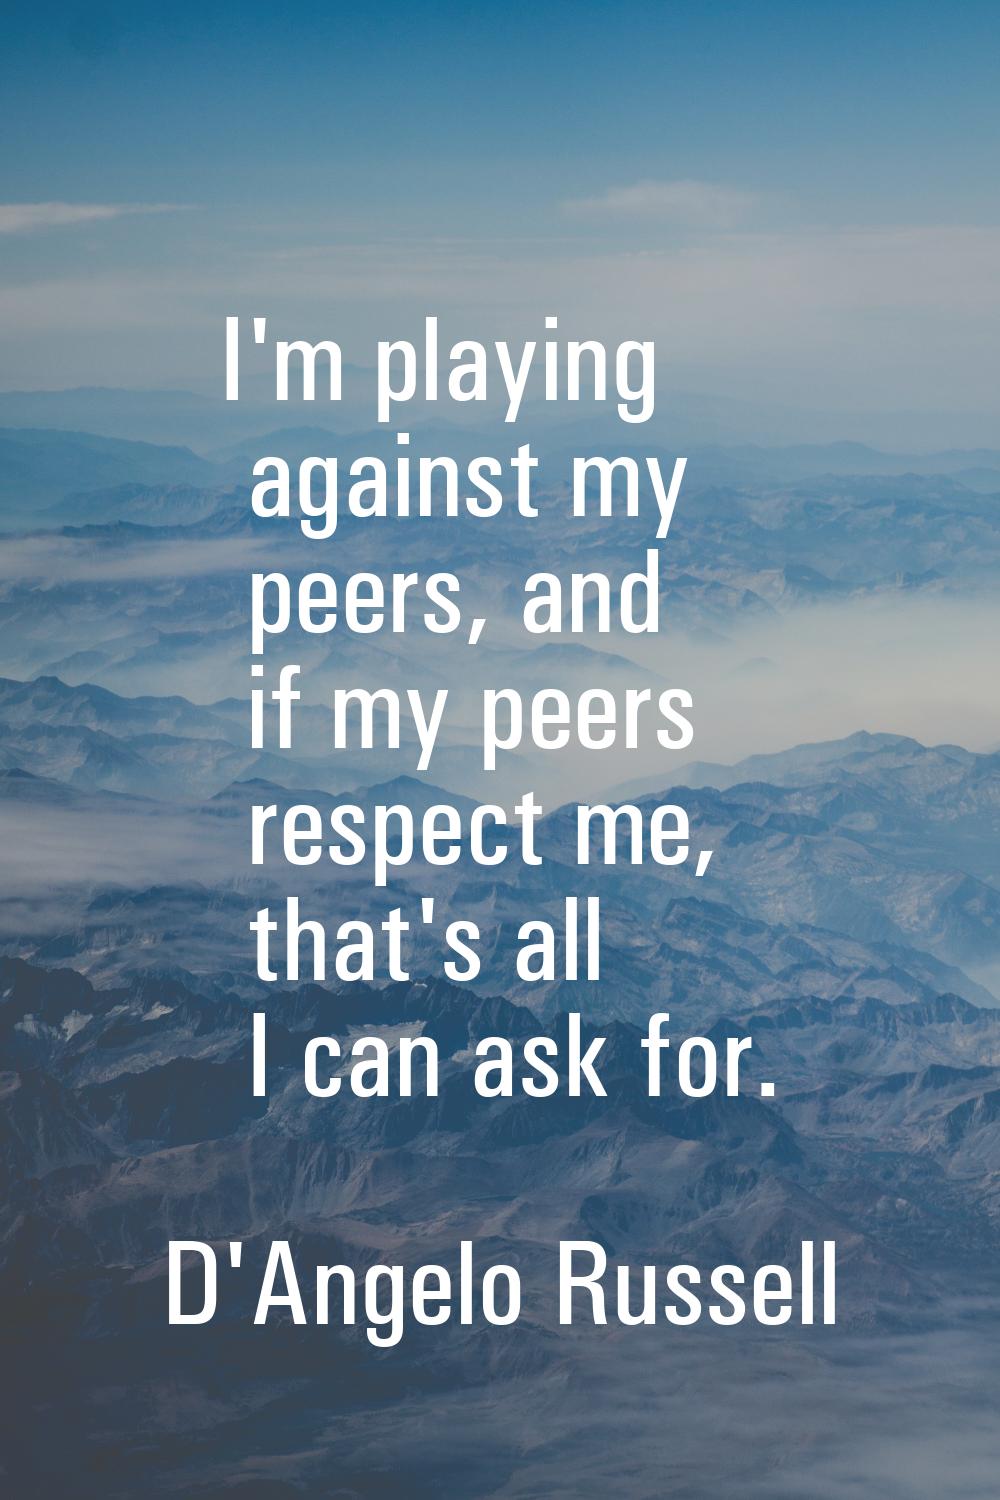 I'm playing against my peers, and if my peers respect me, that's all I can ask for.